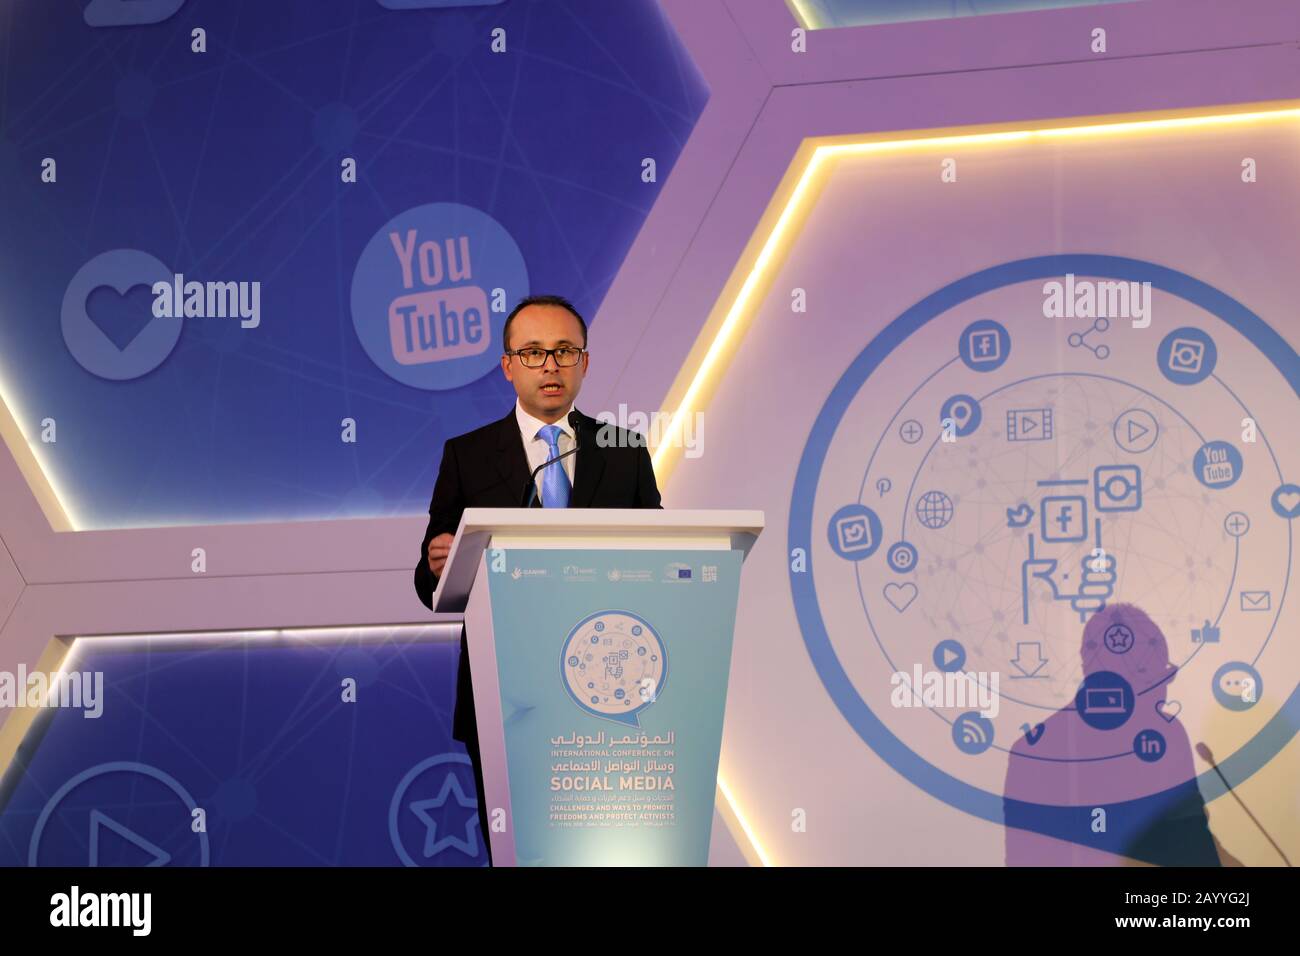 Doha / Qatar – February 17, 2020: Cristian Silviu Bușoi, Romanian member of the European Parliament, speaking at the International Conference on Social Media Stock Photo